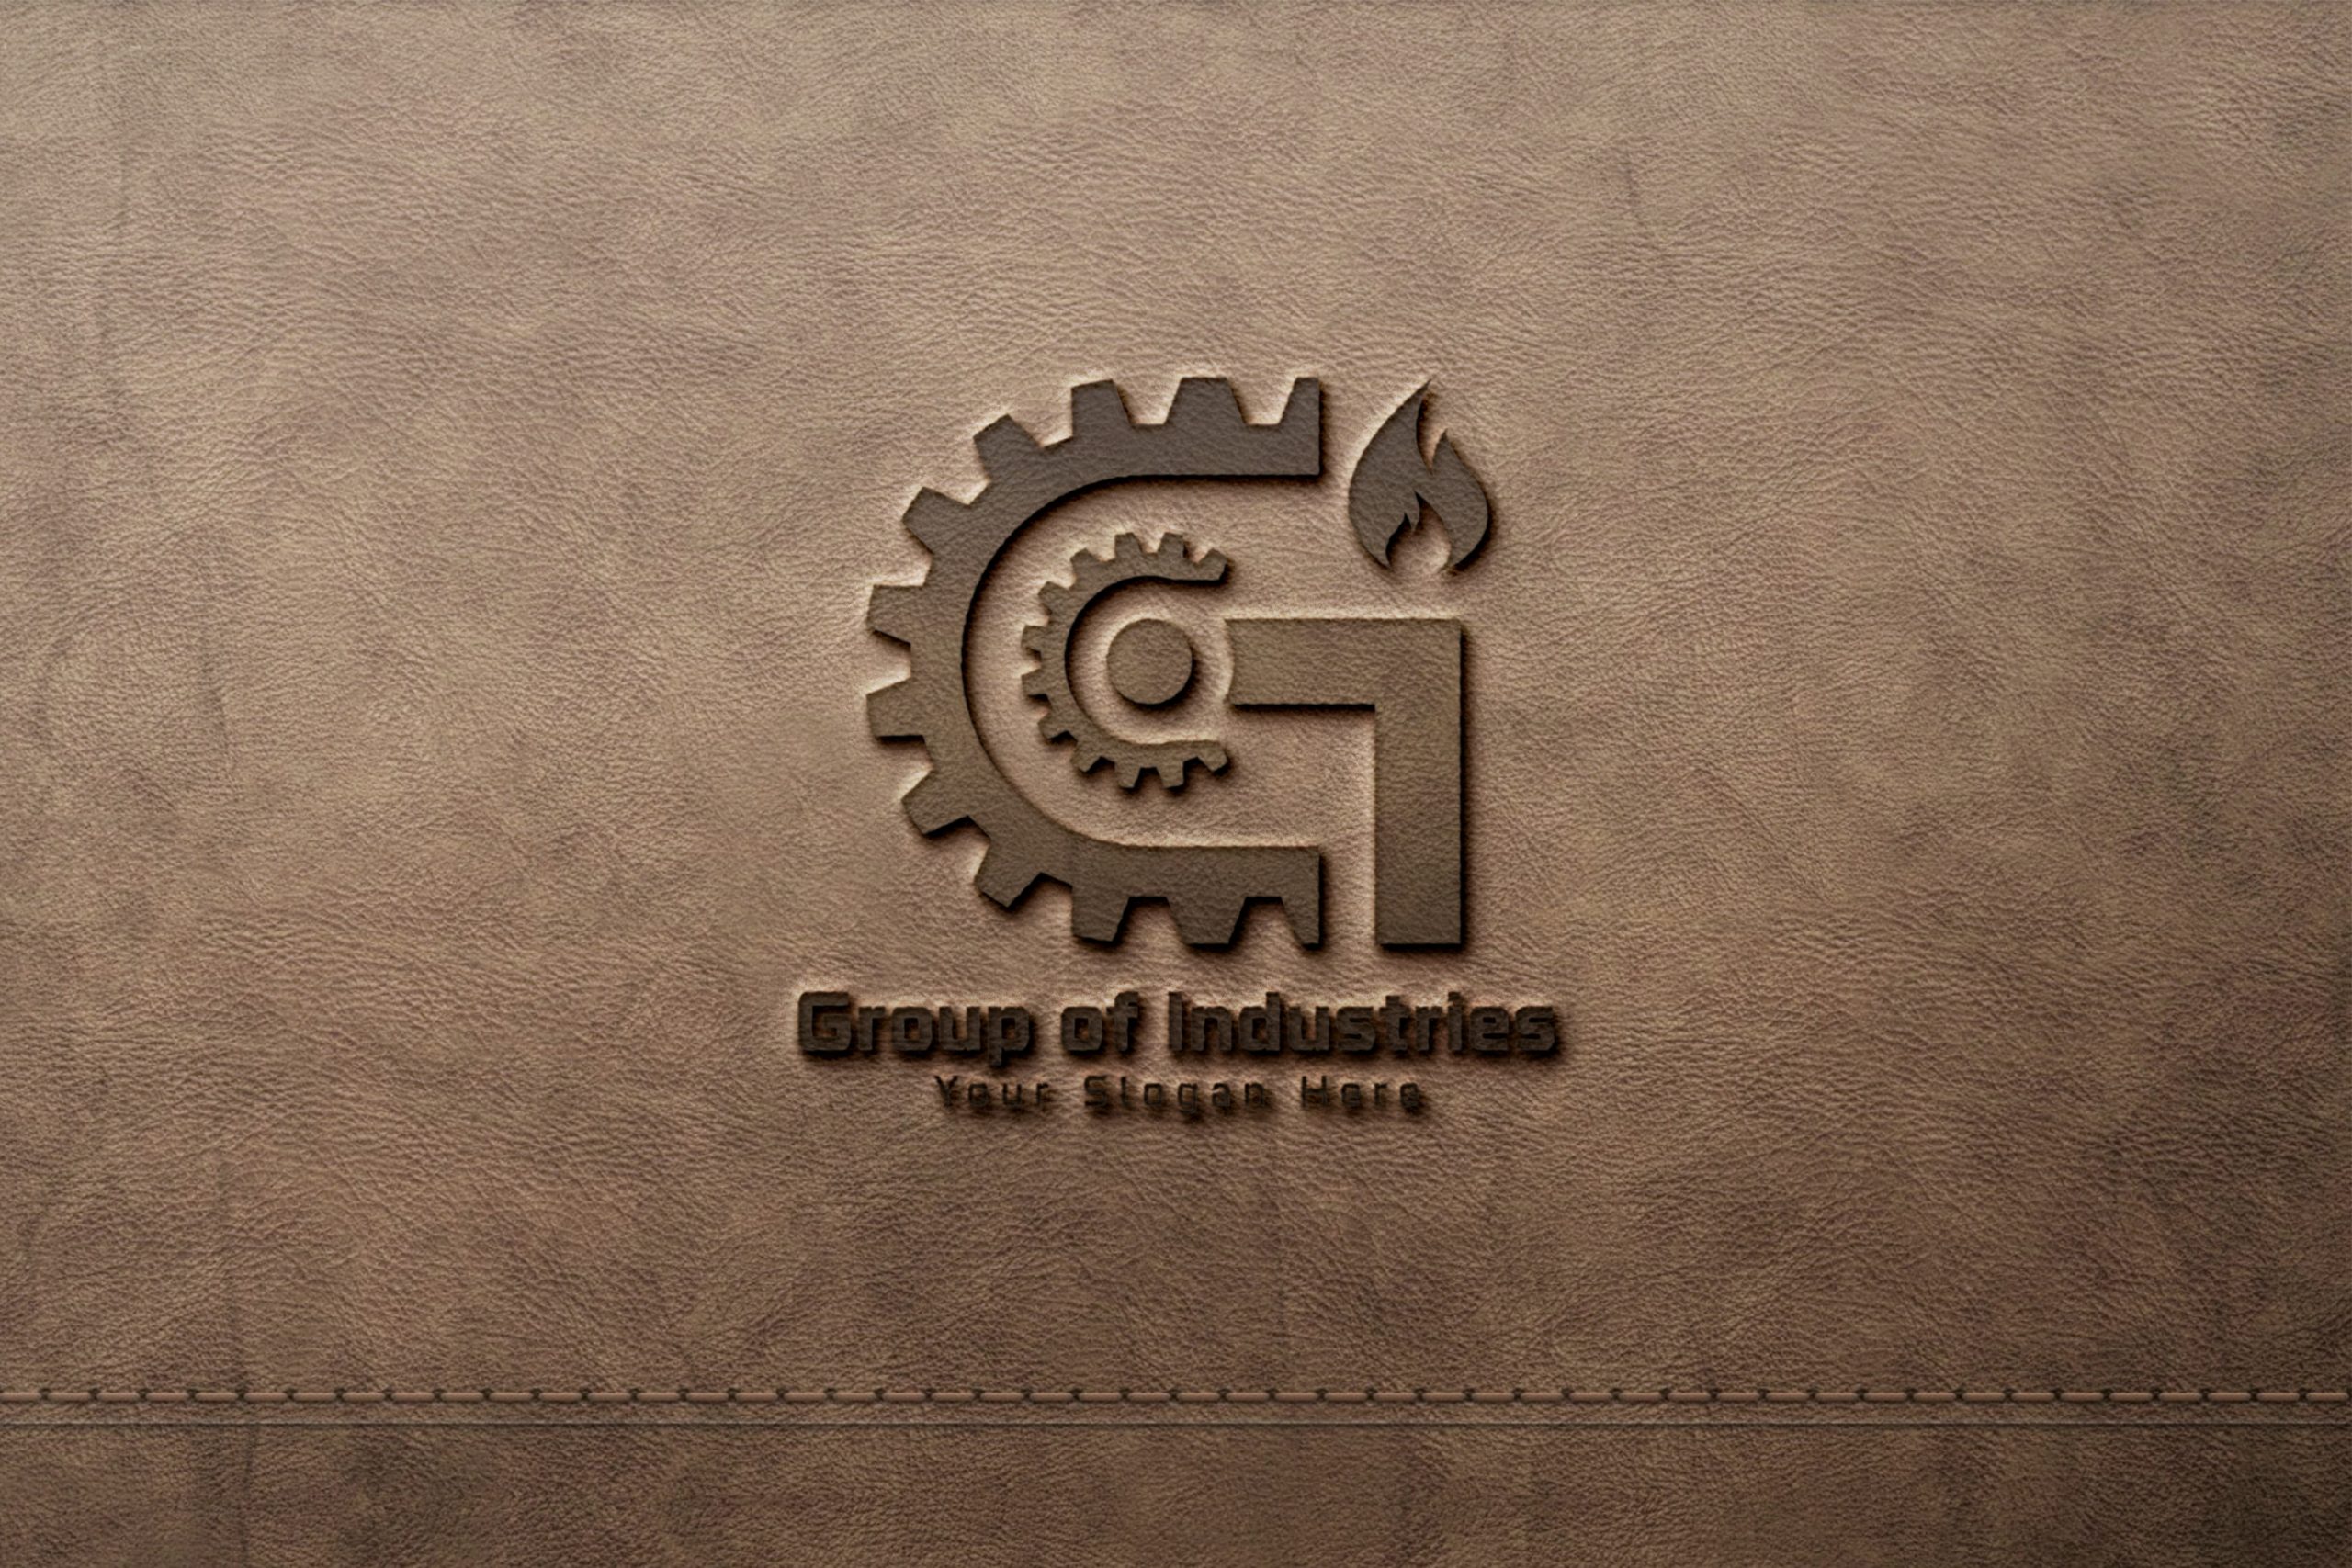 Free Download Group of Industries Logo Design